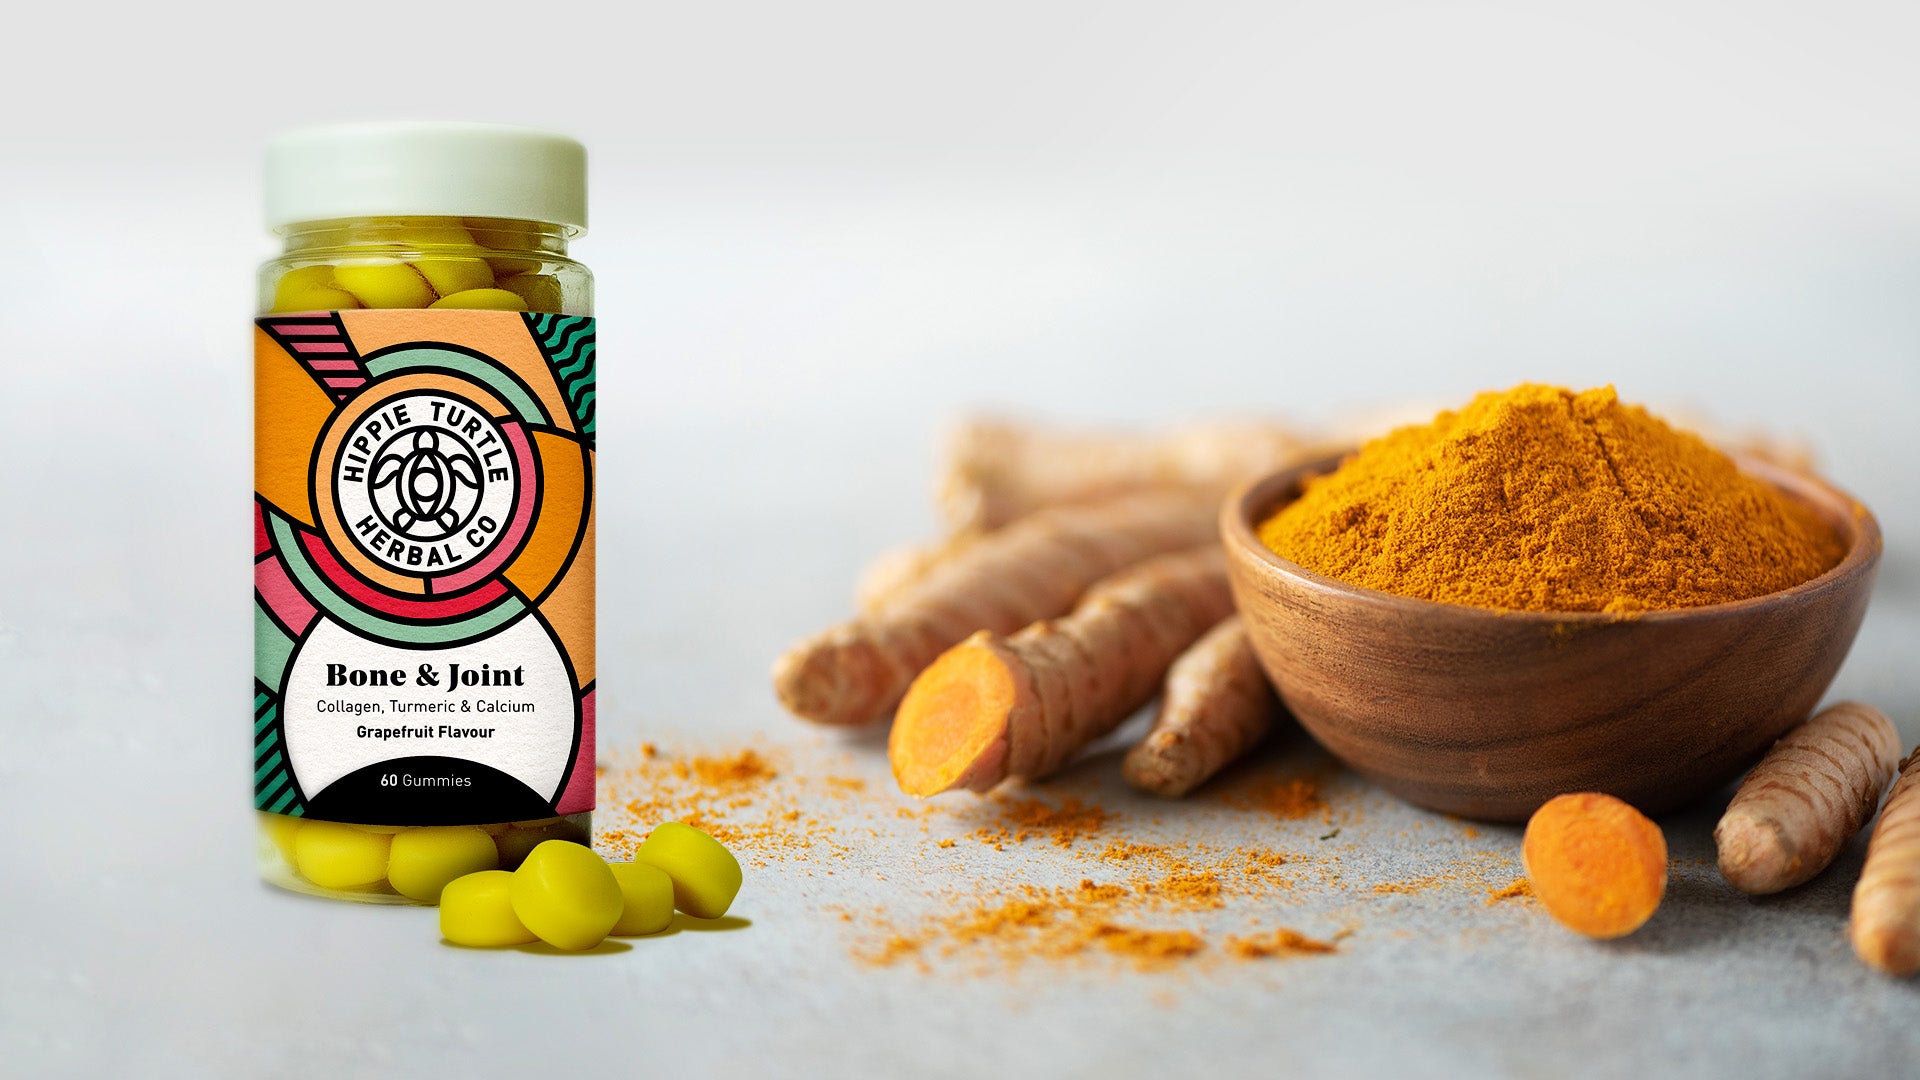 Hippie Turtle Herbal Co Bone & Joint gummies containing turmeric to help reduce joint pain